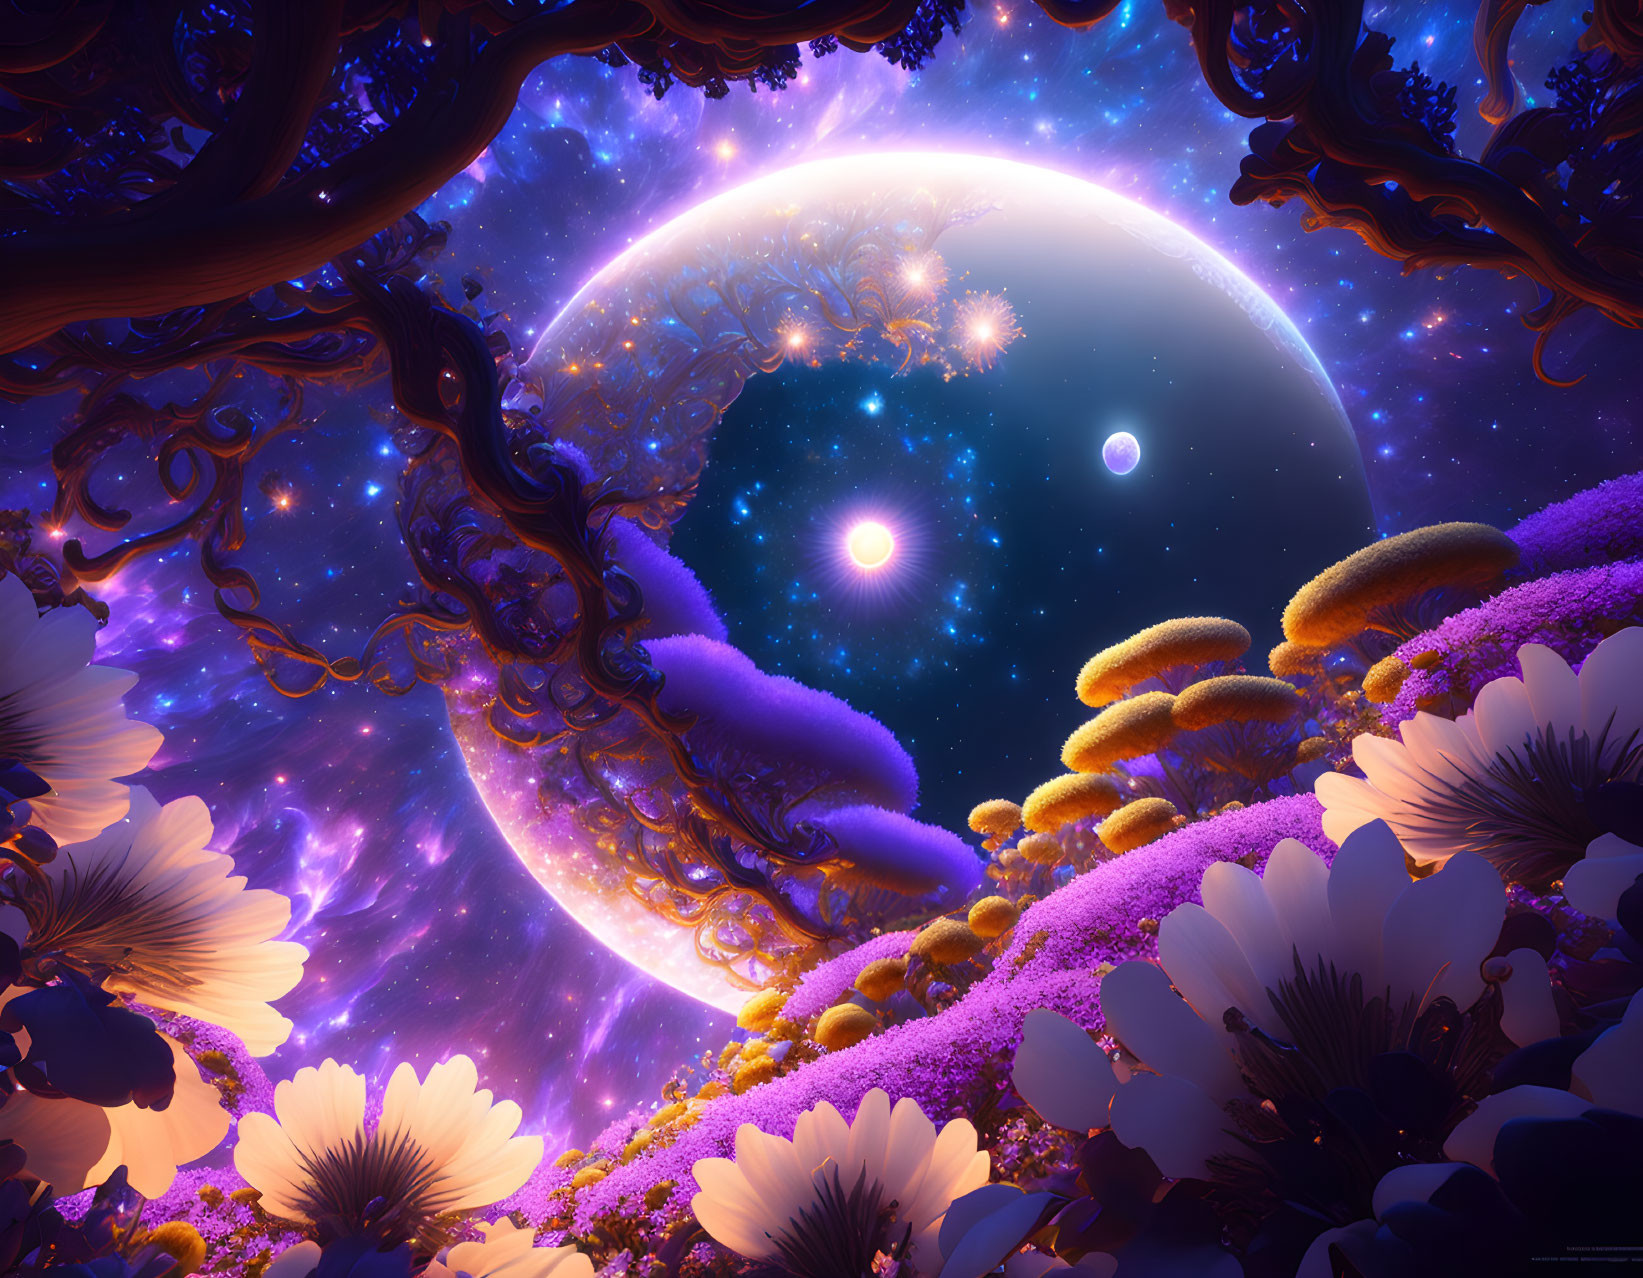 Vibrant fantasy landscape with large moon and purple flora